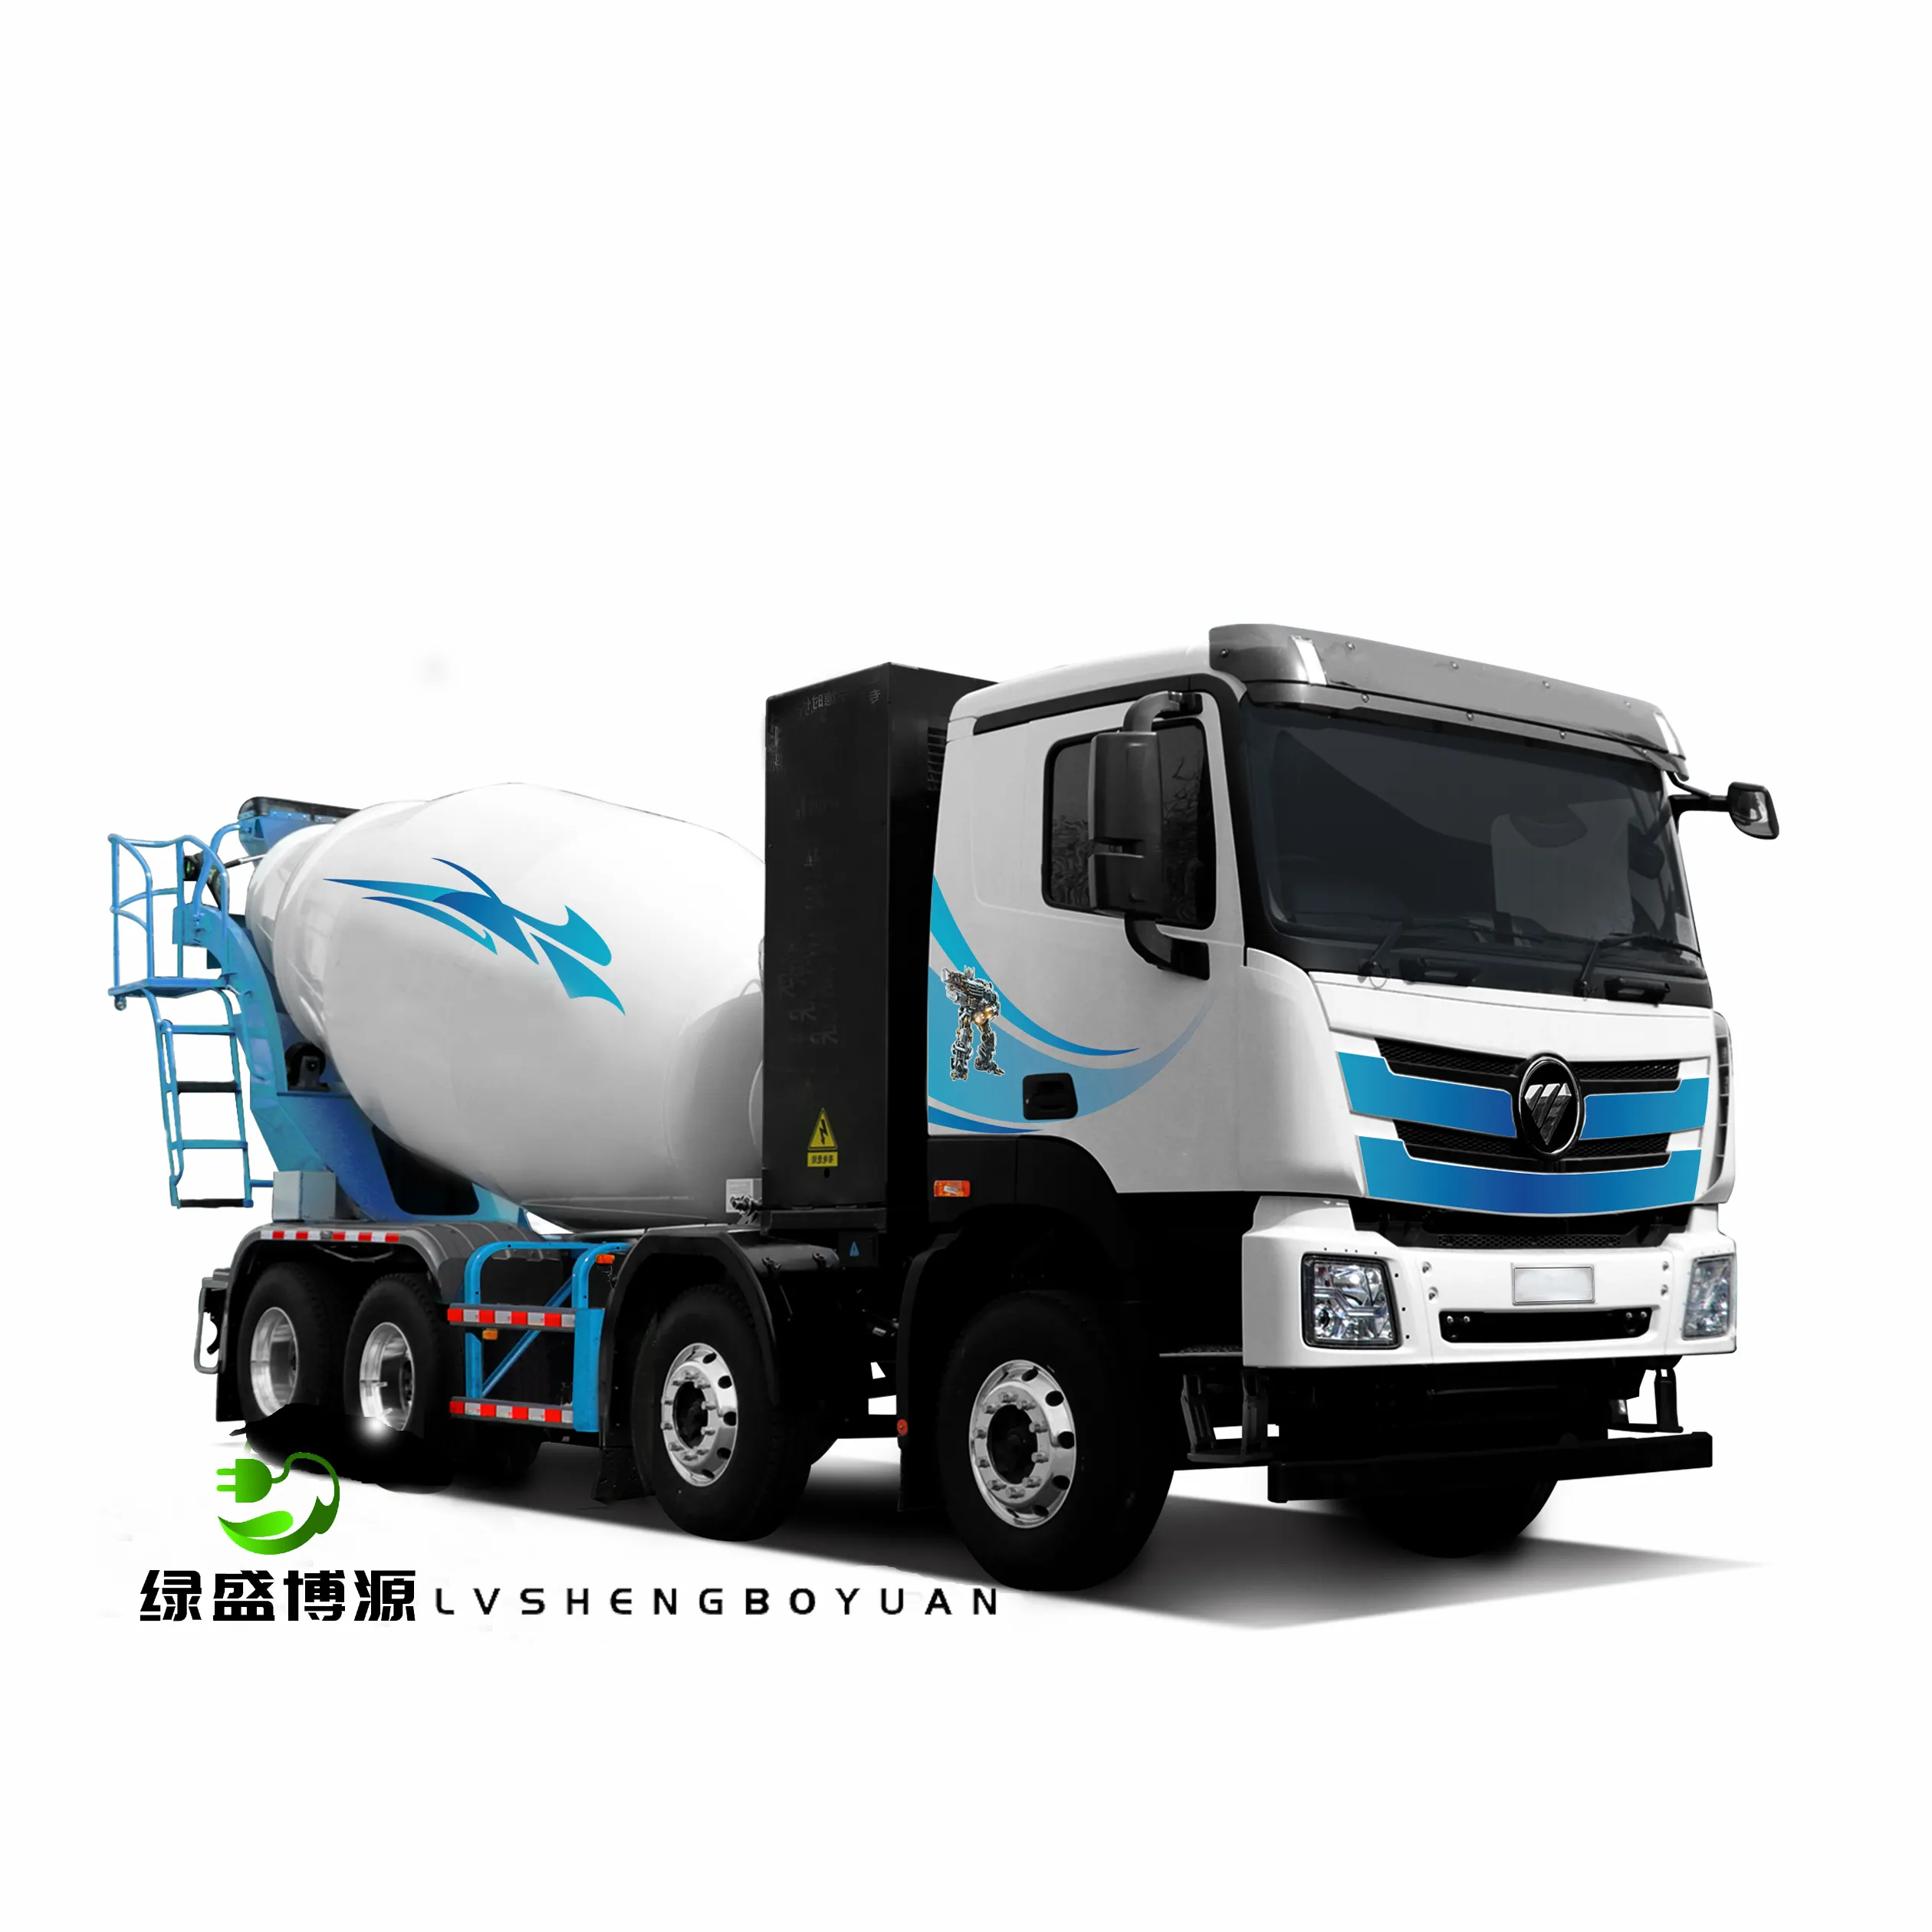 Used Sino concrete mixer truck electric ready mix concrete mixer truck pricely used truck for sale